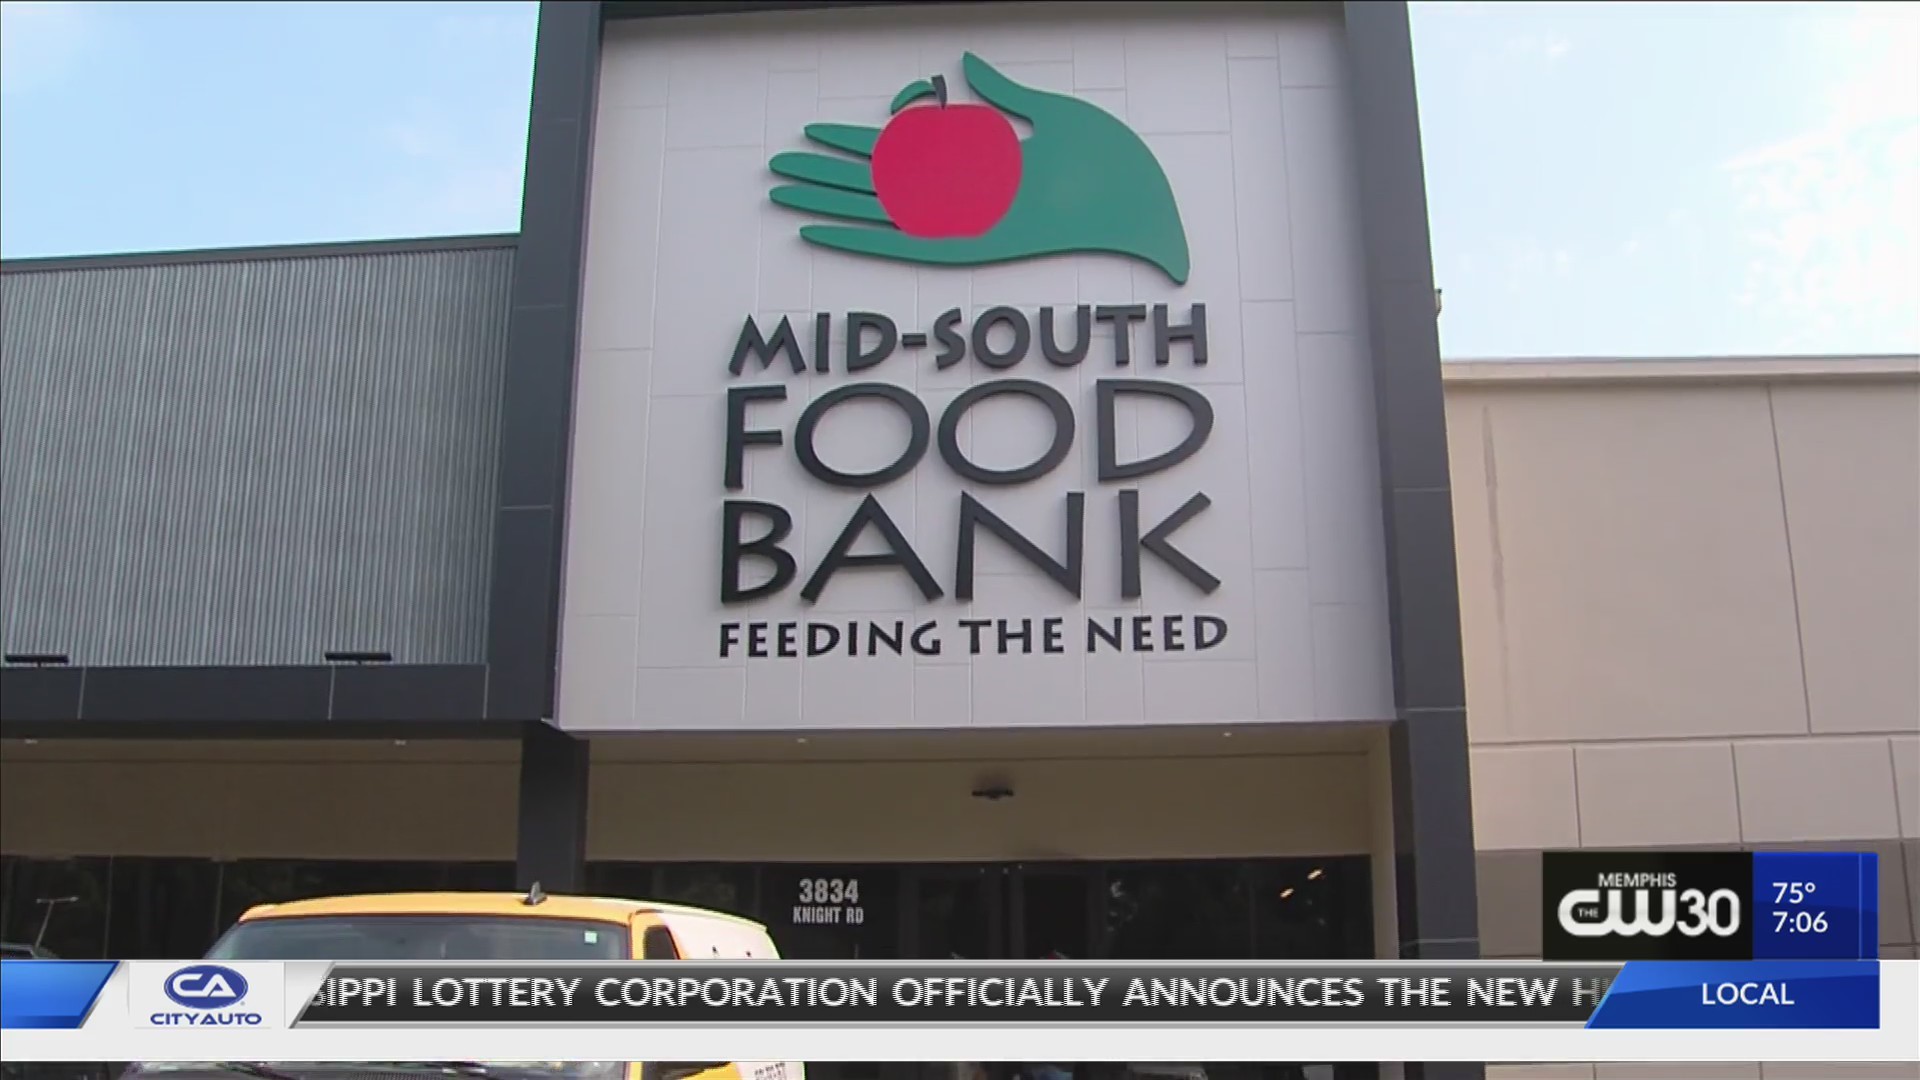 Mid-South Food Bank readies to serve more food-insecure people with massive facility upgrade 7am